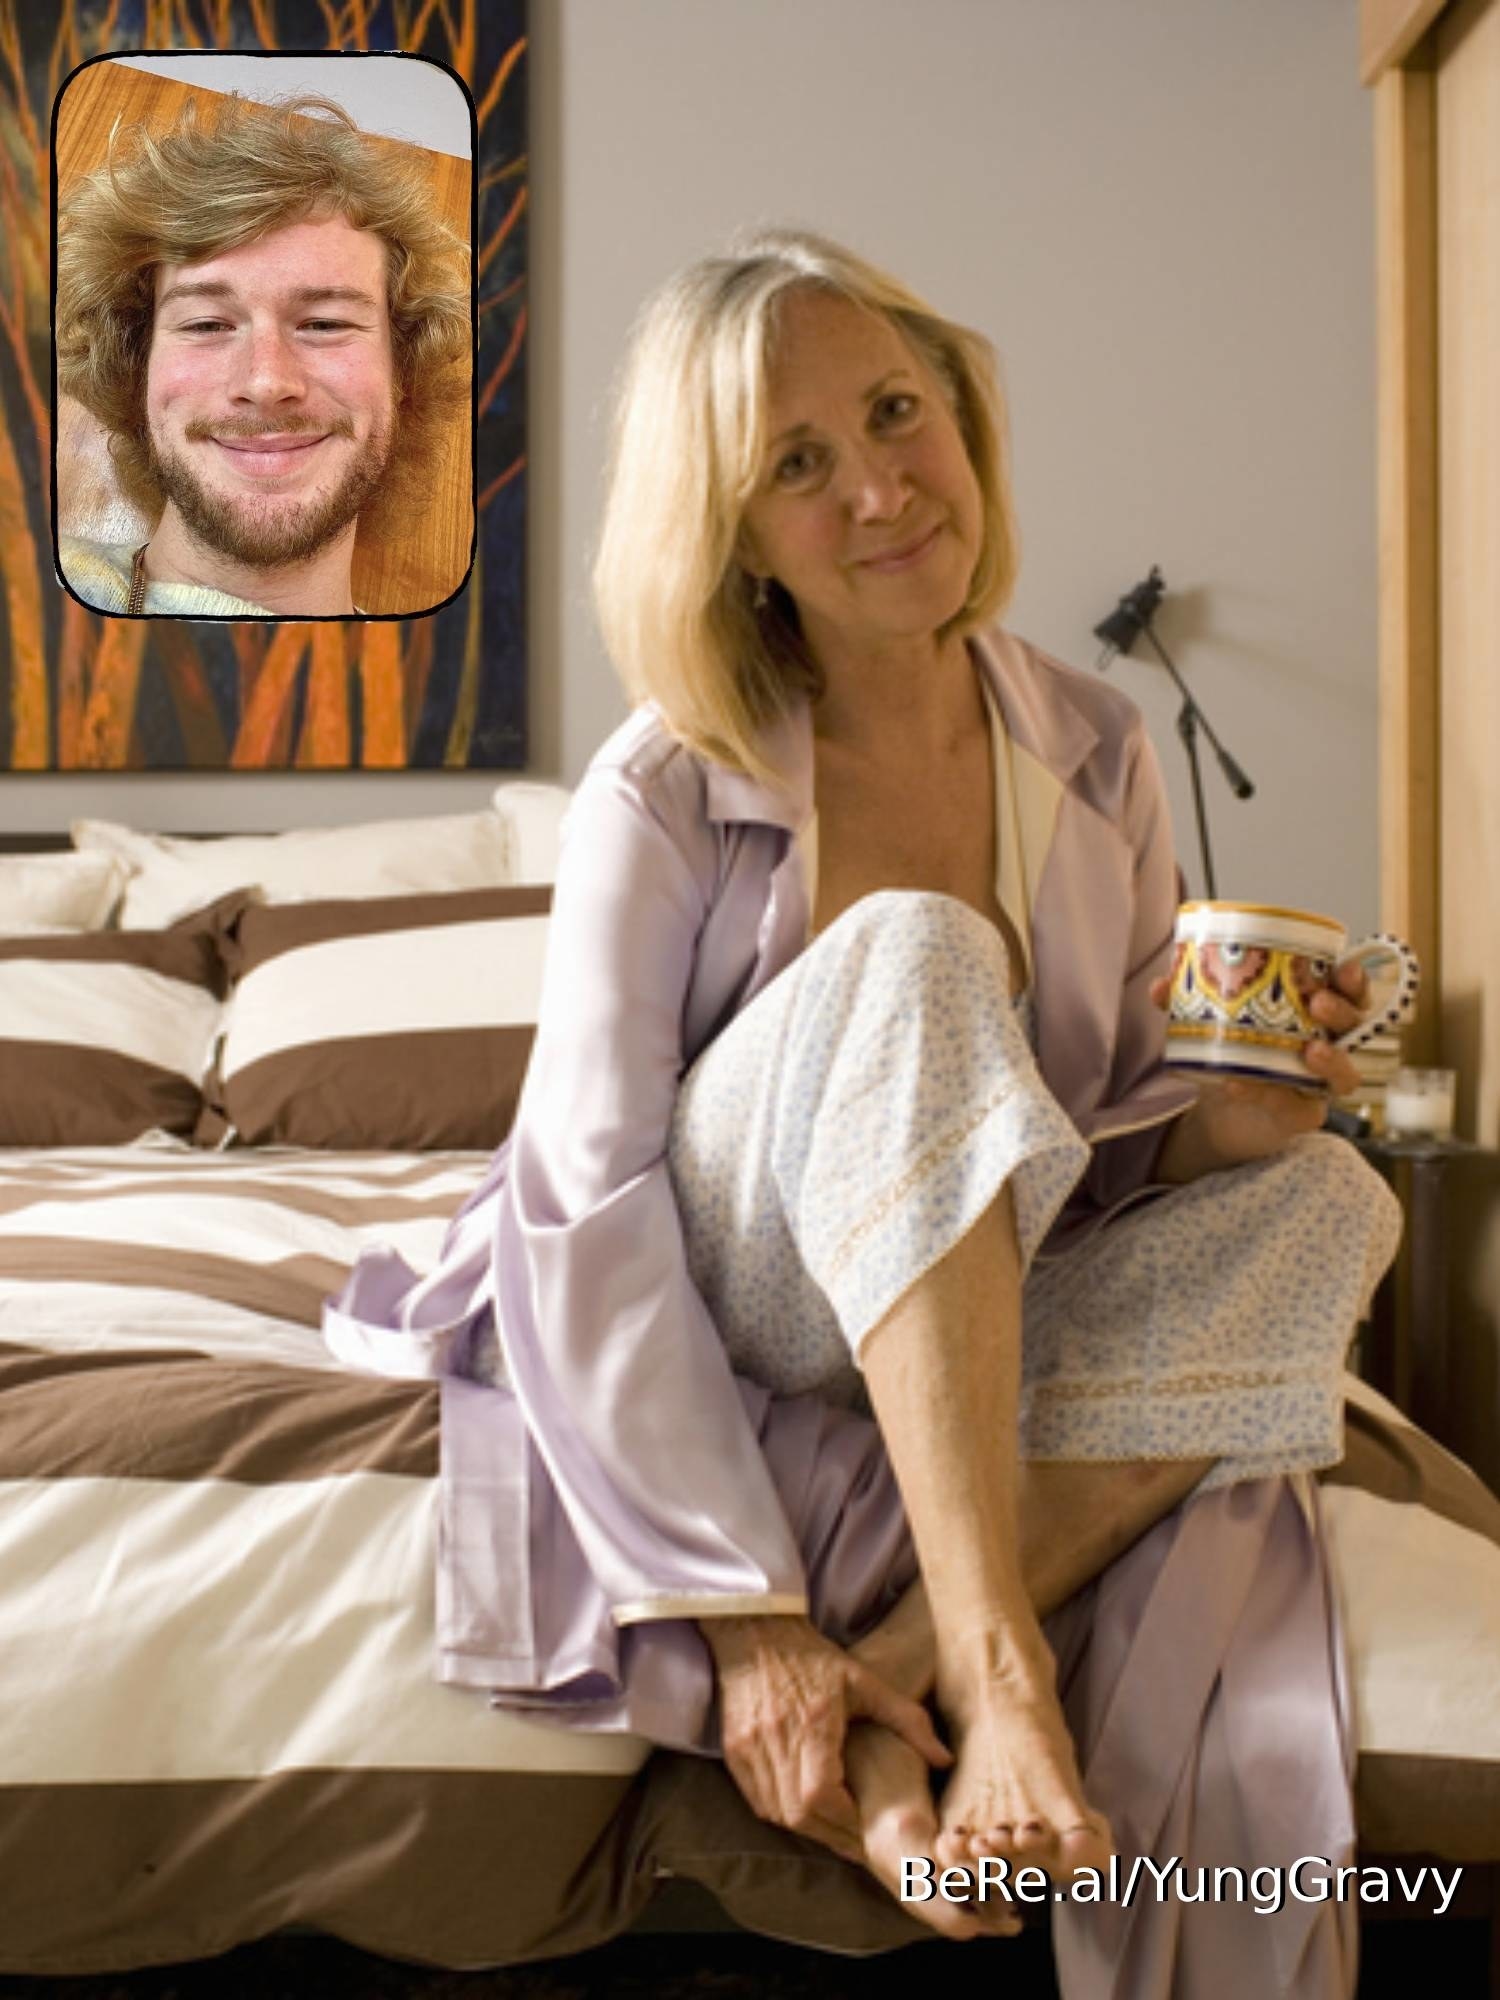 Yung Gravy smiling at an older woman sitting on a bed